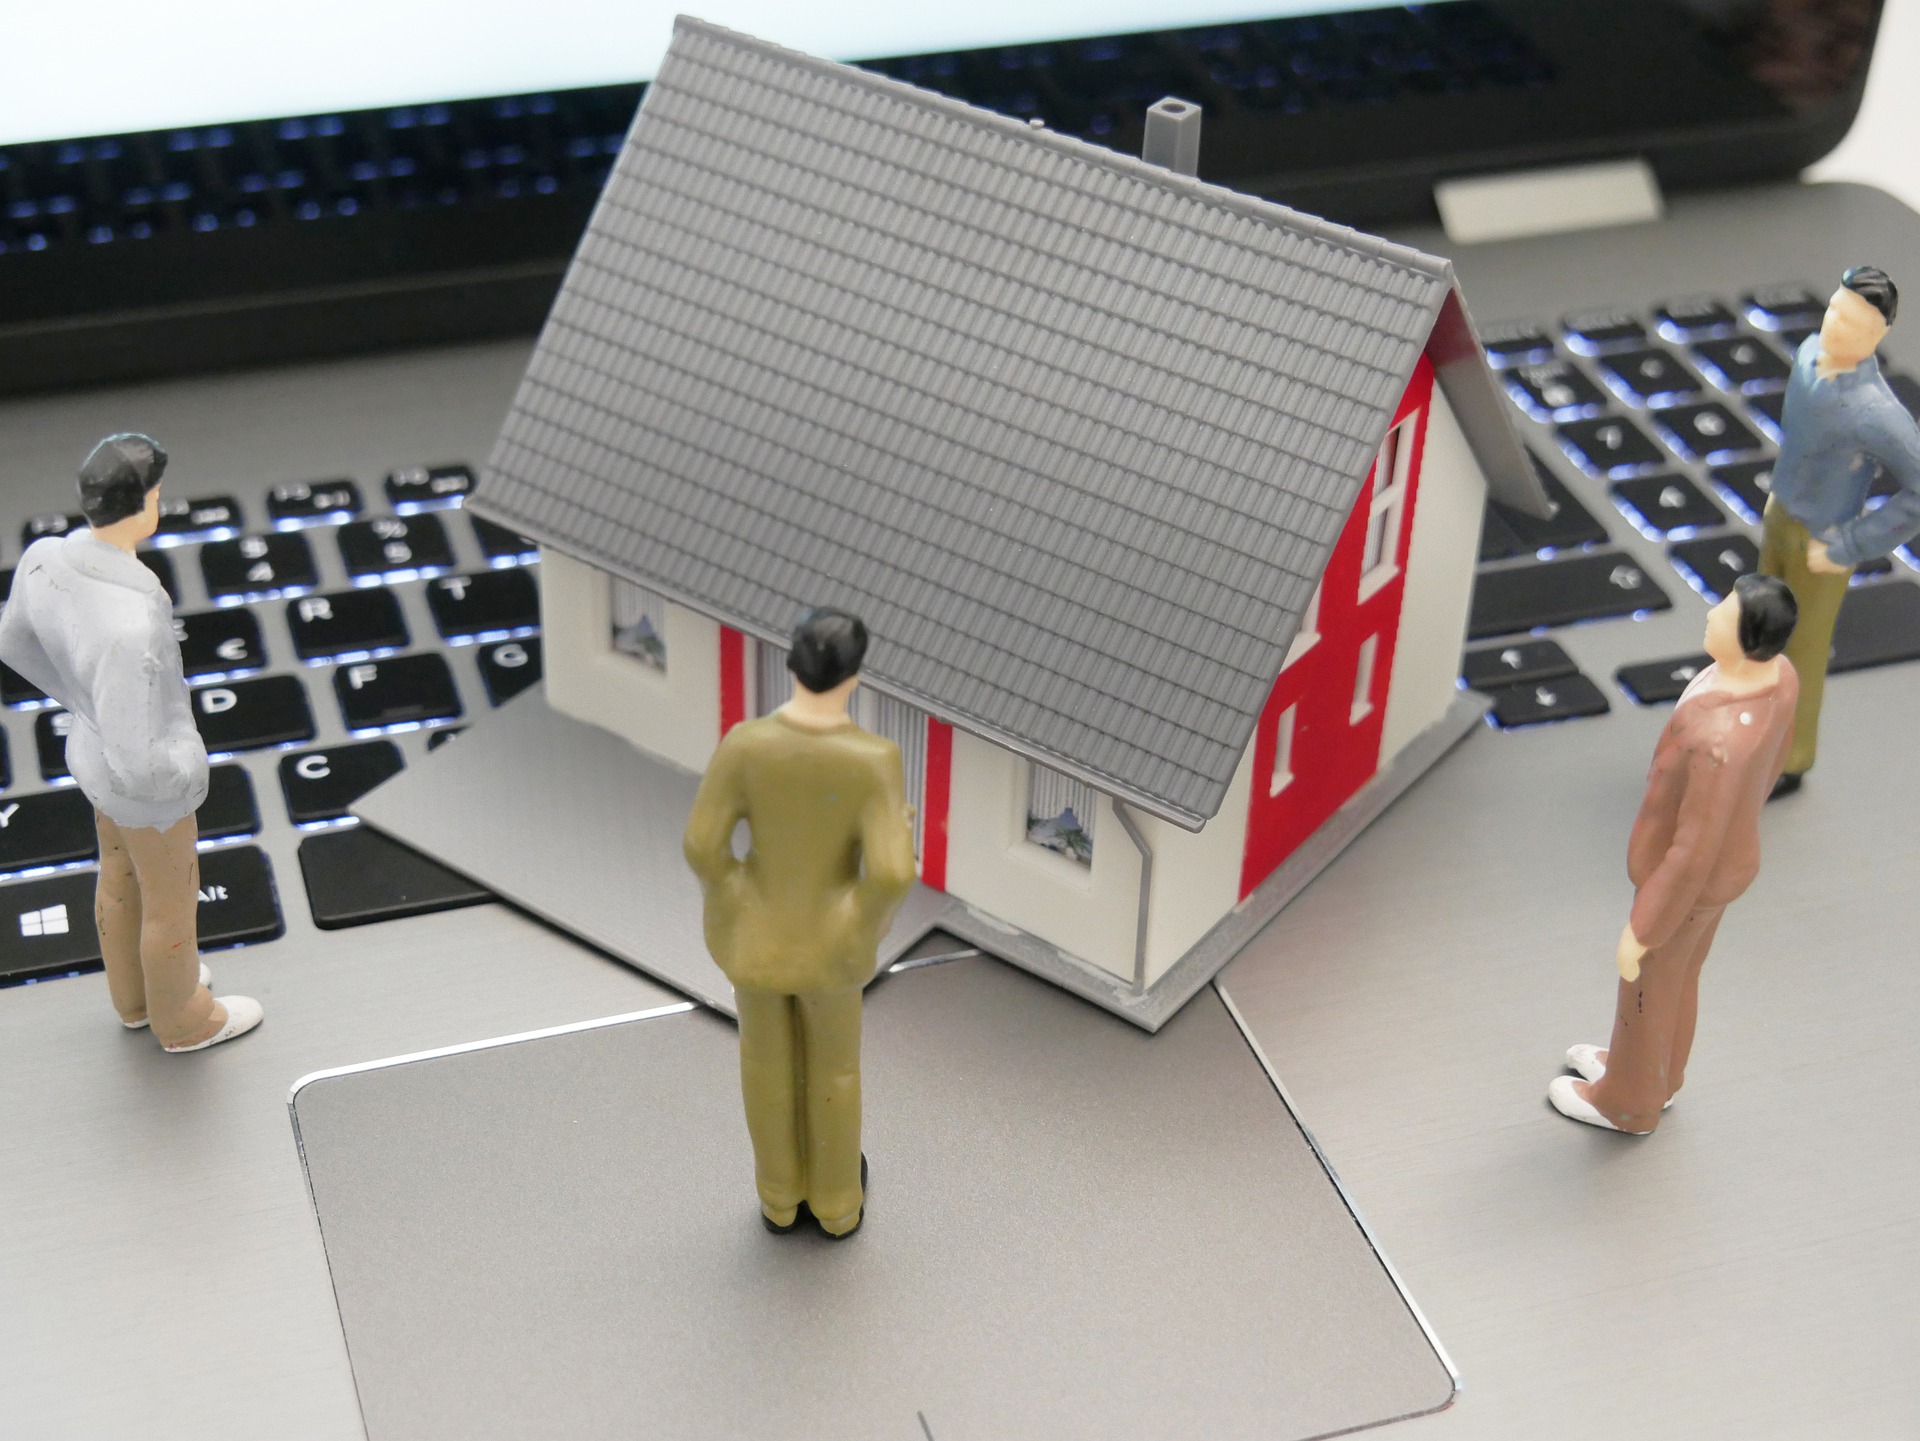 Article about Could Defaulting Commercial Mortgage Loans Help Alleviate Housing Shortage